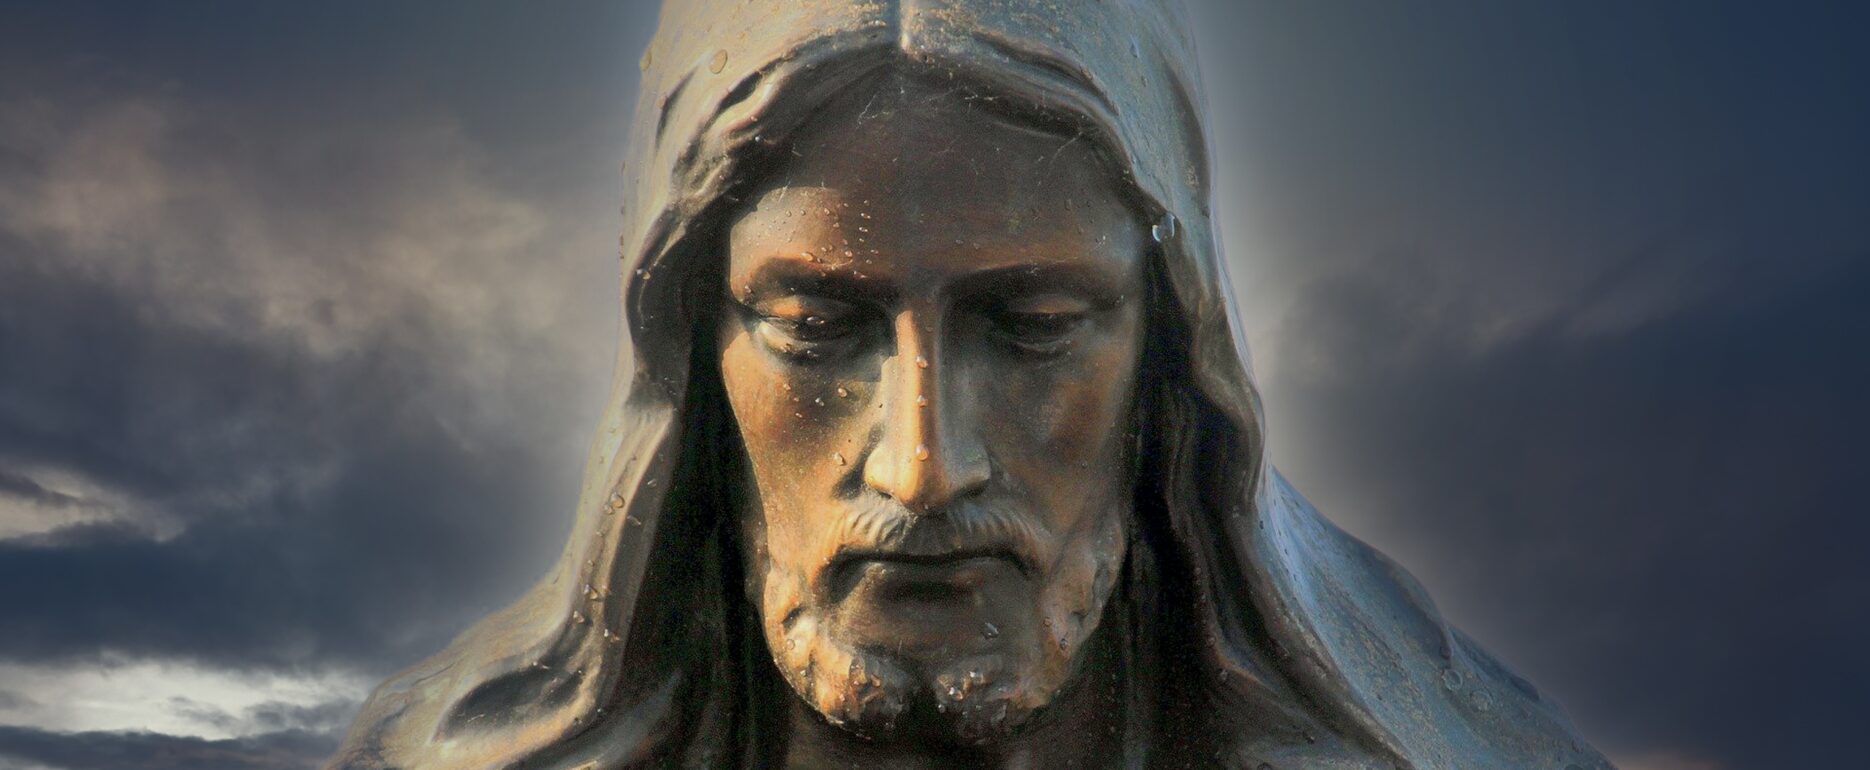 statue of Jesus' face with downward turned face